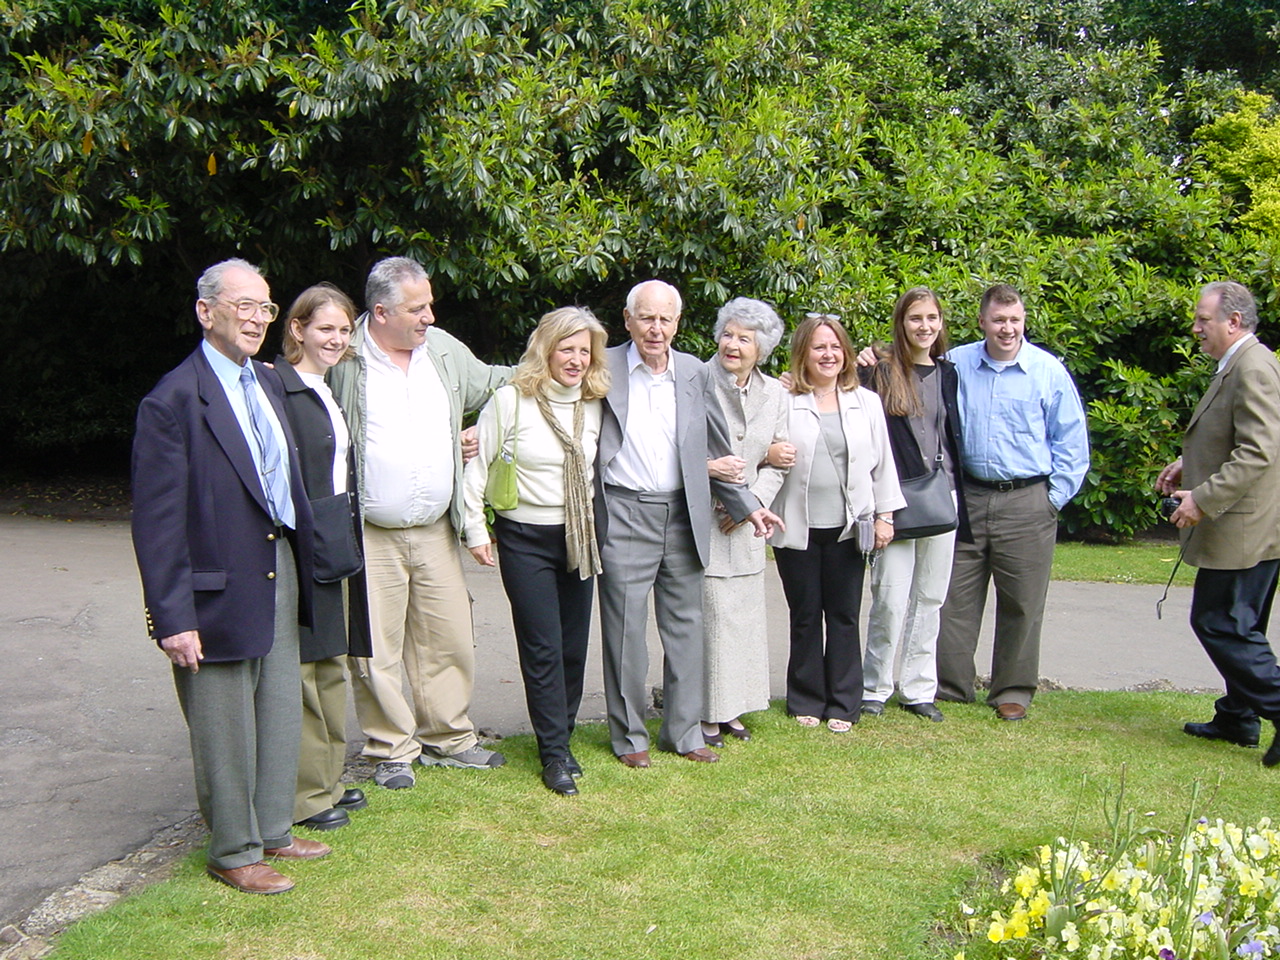 a group of elderly people standing on a grassy area